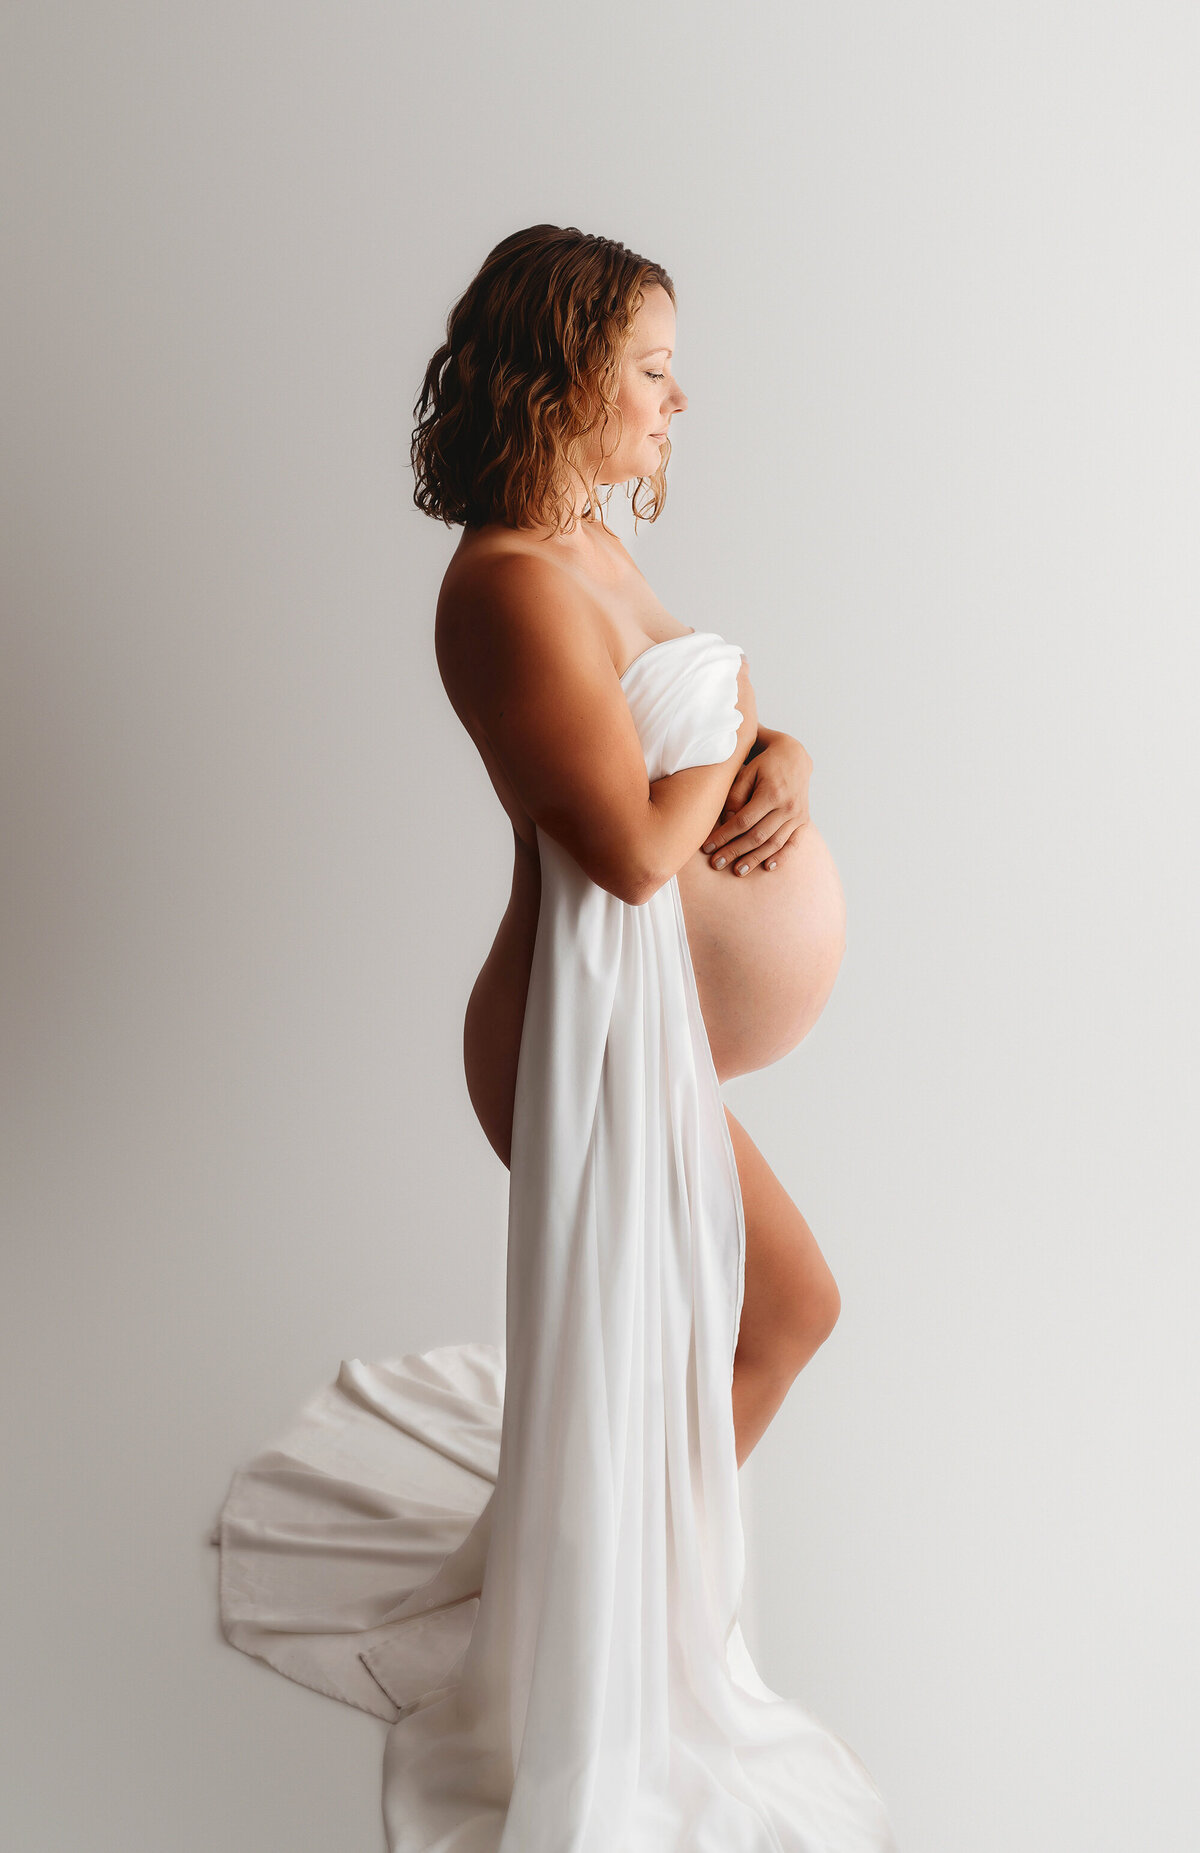 Pregnant woman poses for Maternity Photoshoot in Asheville, NC.